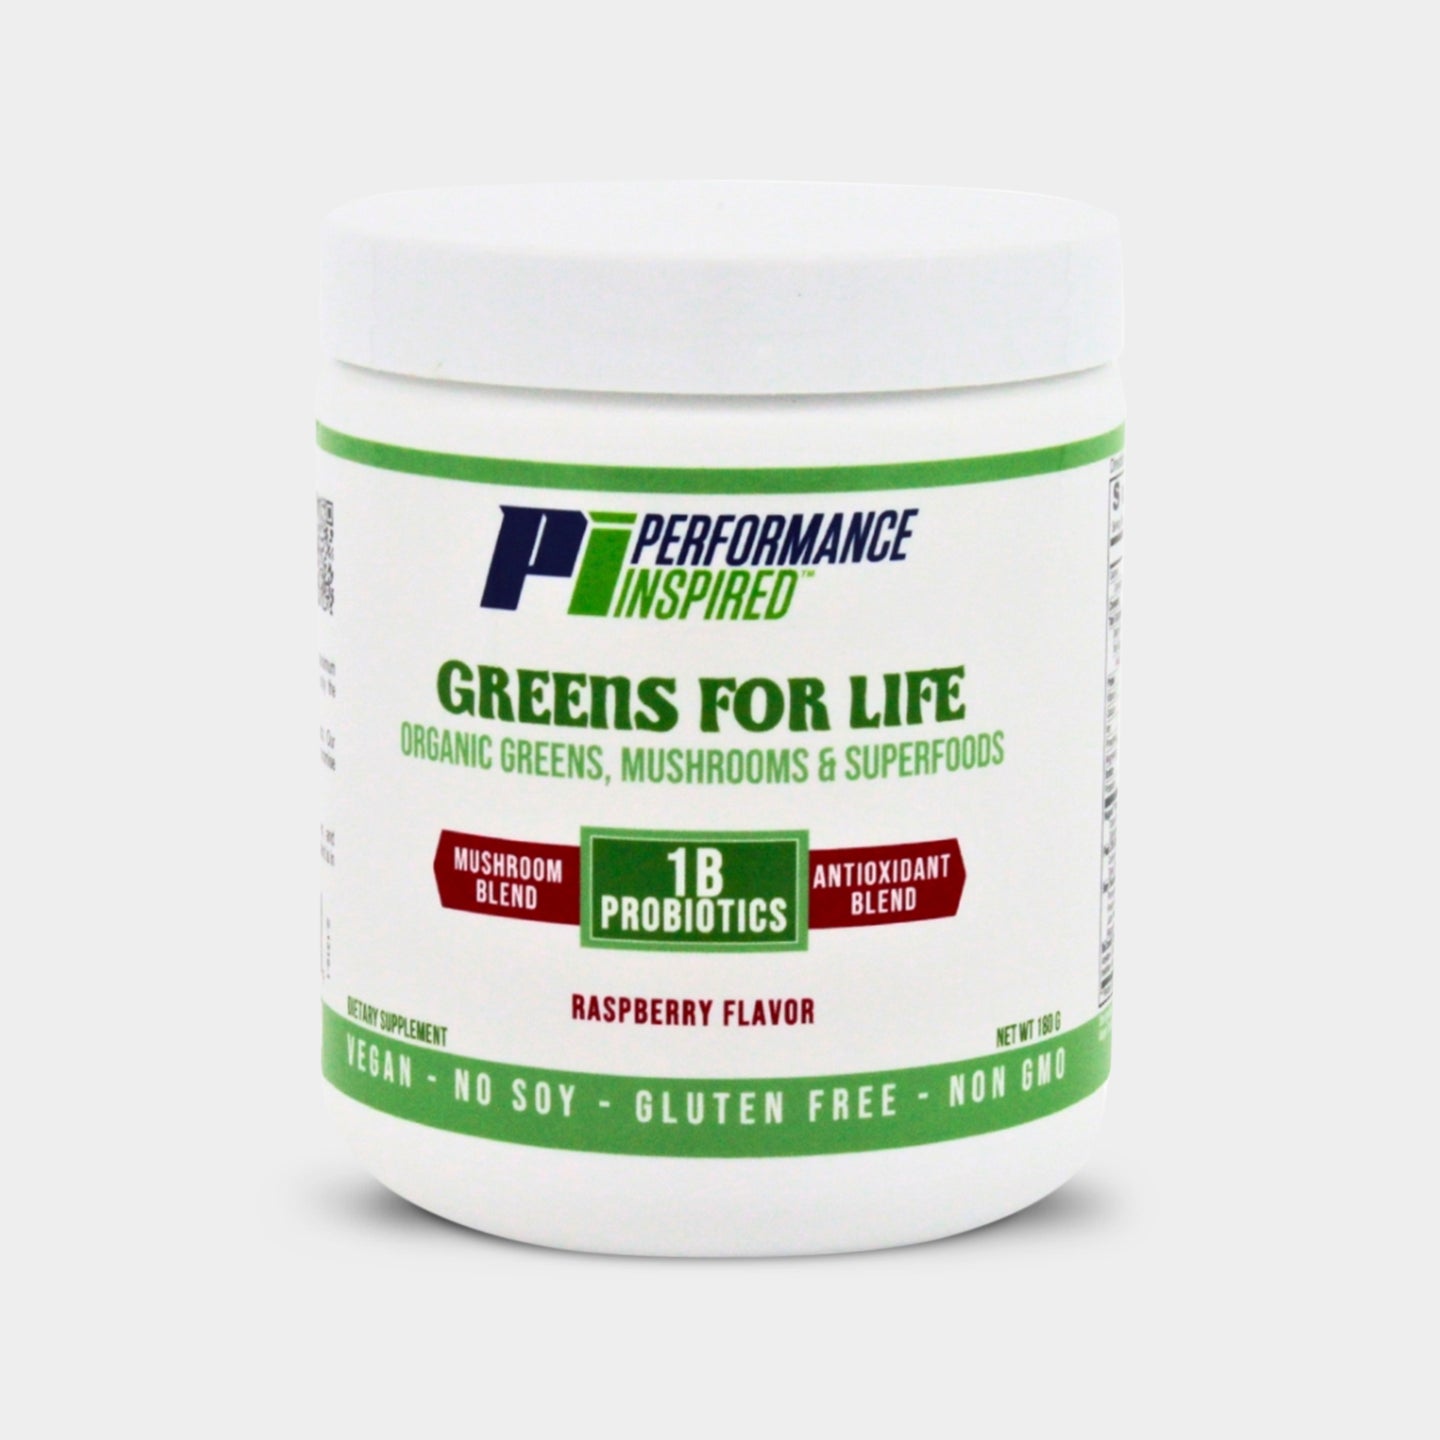 Performance Inspired Nutrition Greens for Life - Organic Greens, Mushrooms, & Superfoods A1